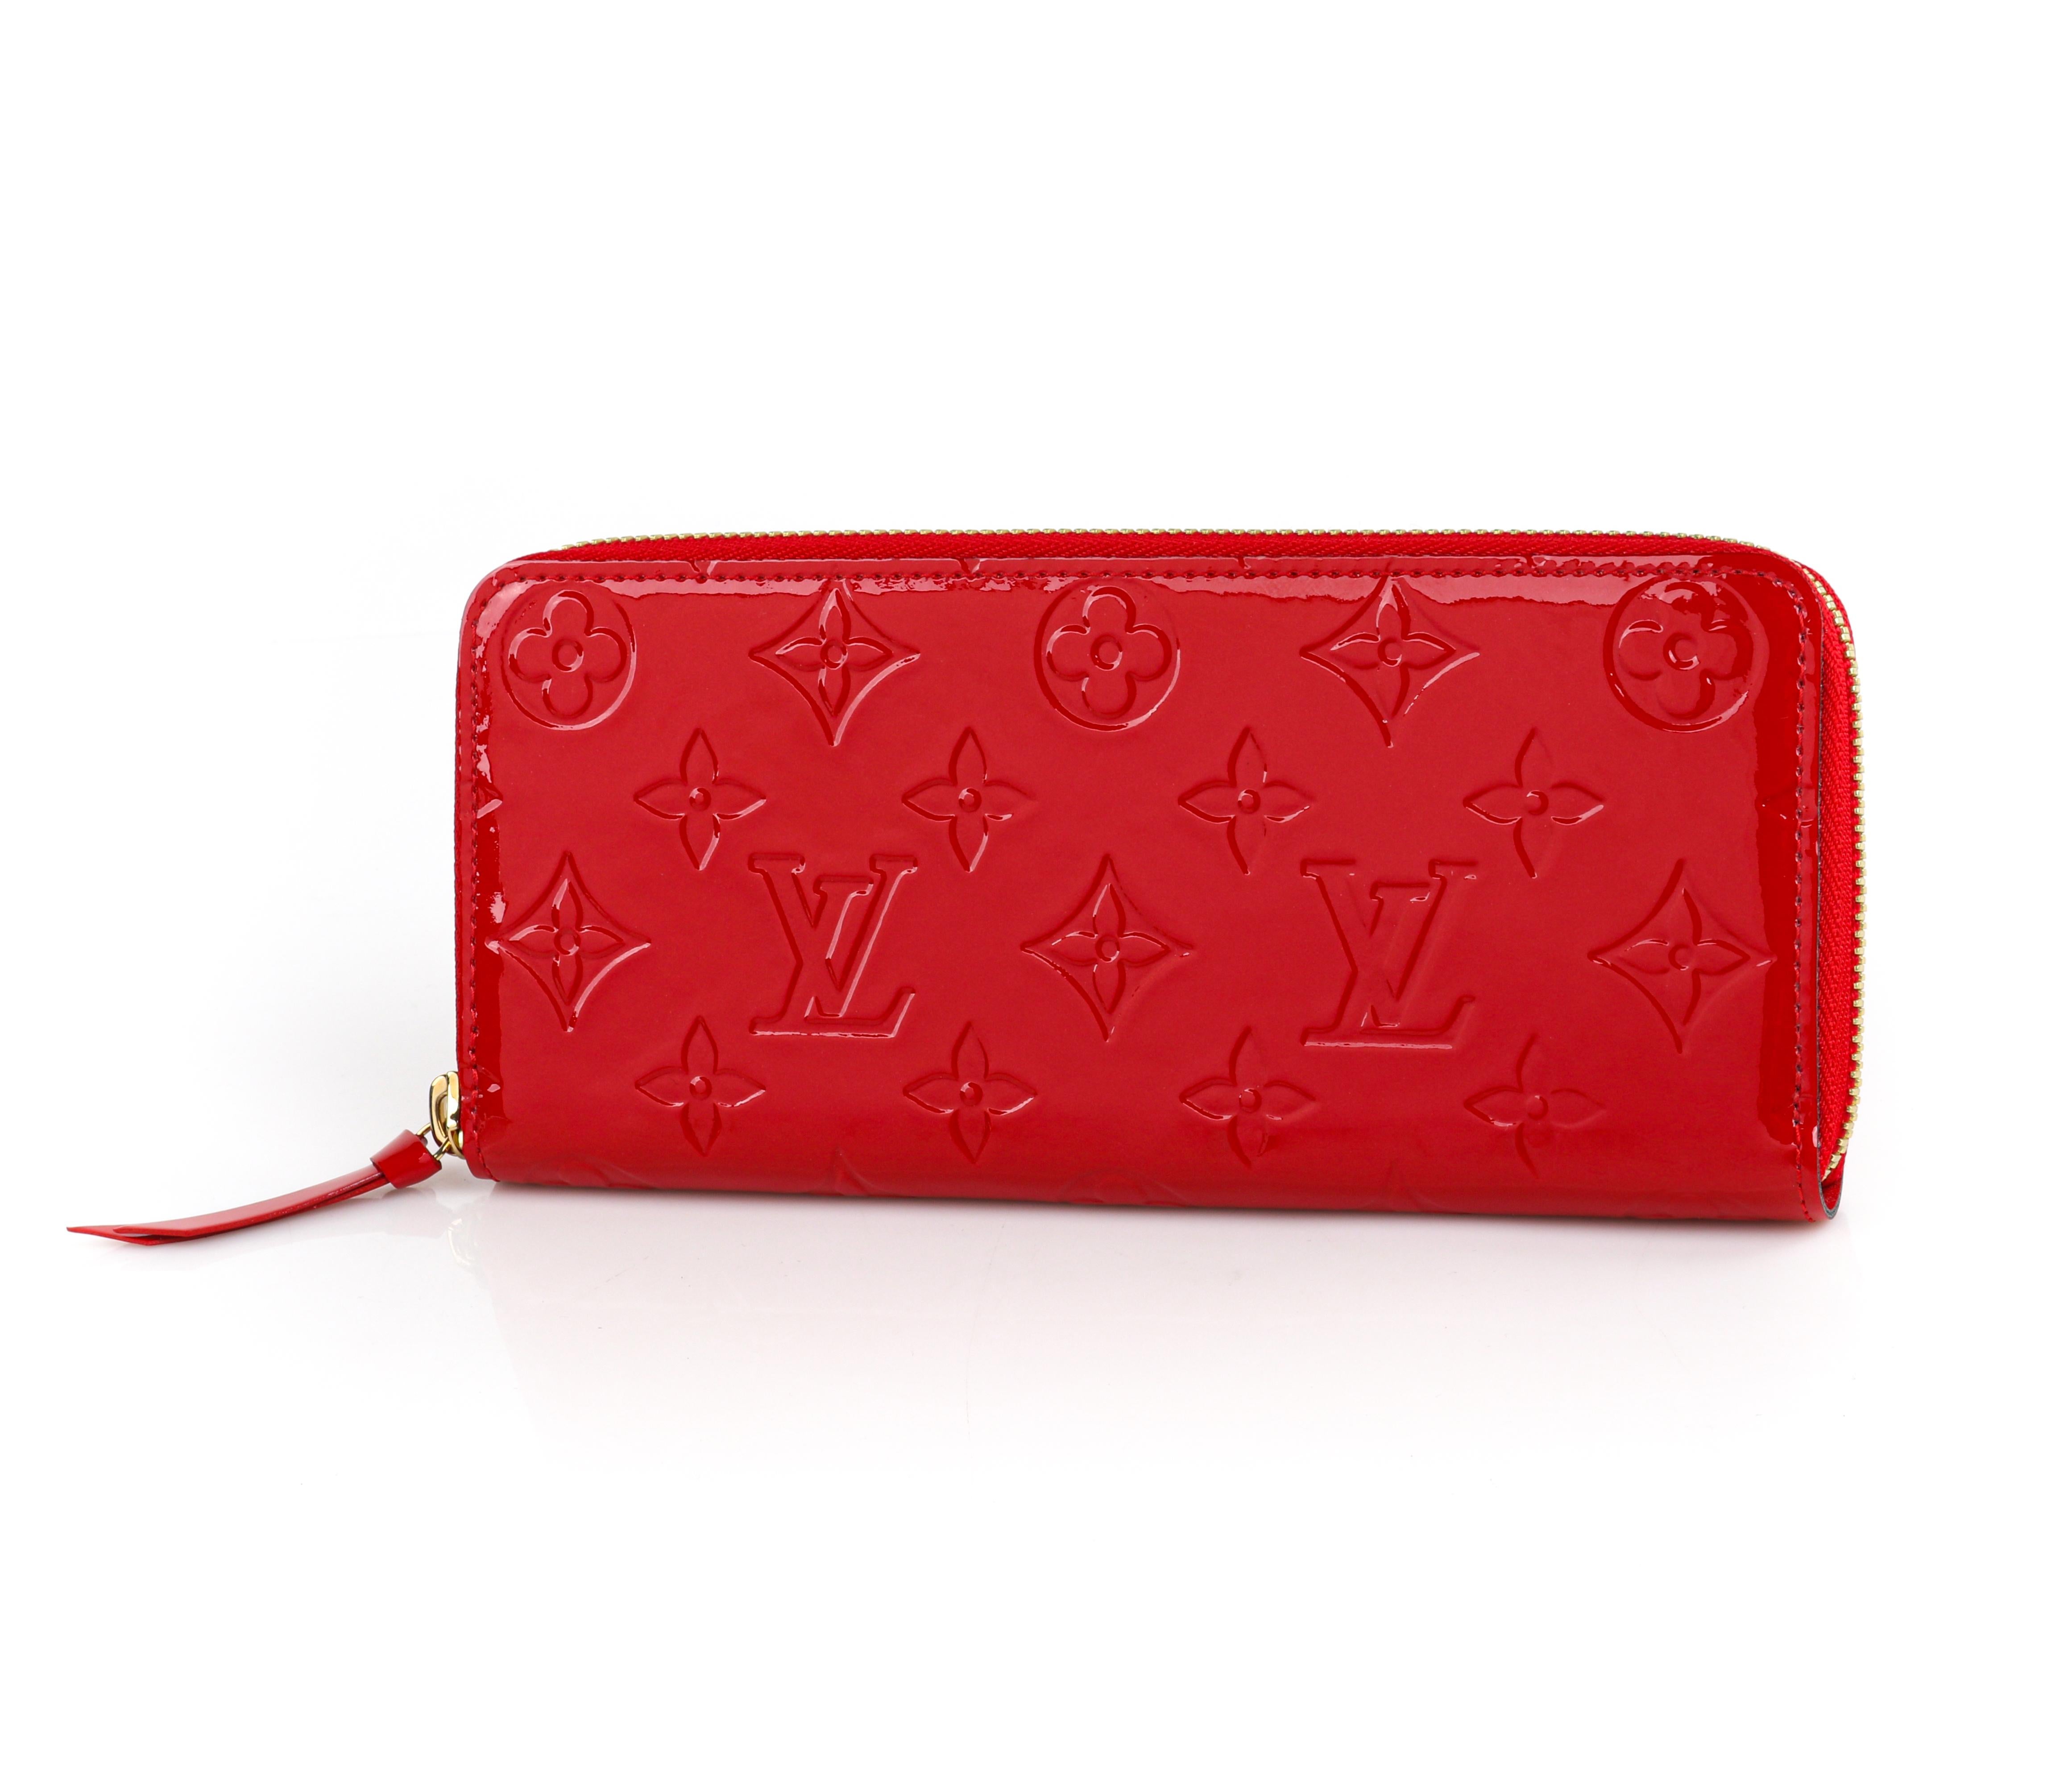 LOUIS VUITTON c.2015 “Clemence” Red Monogram Vernis Leather Zip Around Wallet
 
Estimated Retail: $970.00
 
Brand/Manufacturer:  Louis Vuitton 
Circa: 2015
Designer: Nicolas Ghesquiere
Style: Zip-up wallet
Color(s): “Cherry” red
Lined: Yes
Unmarked